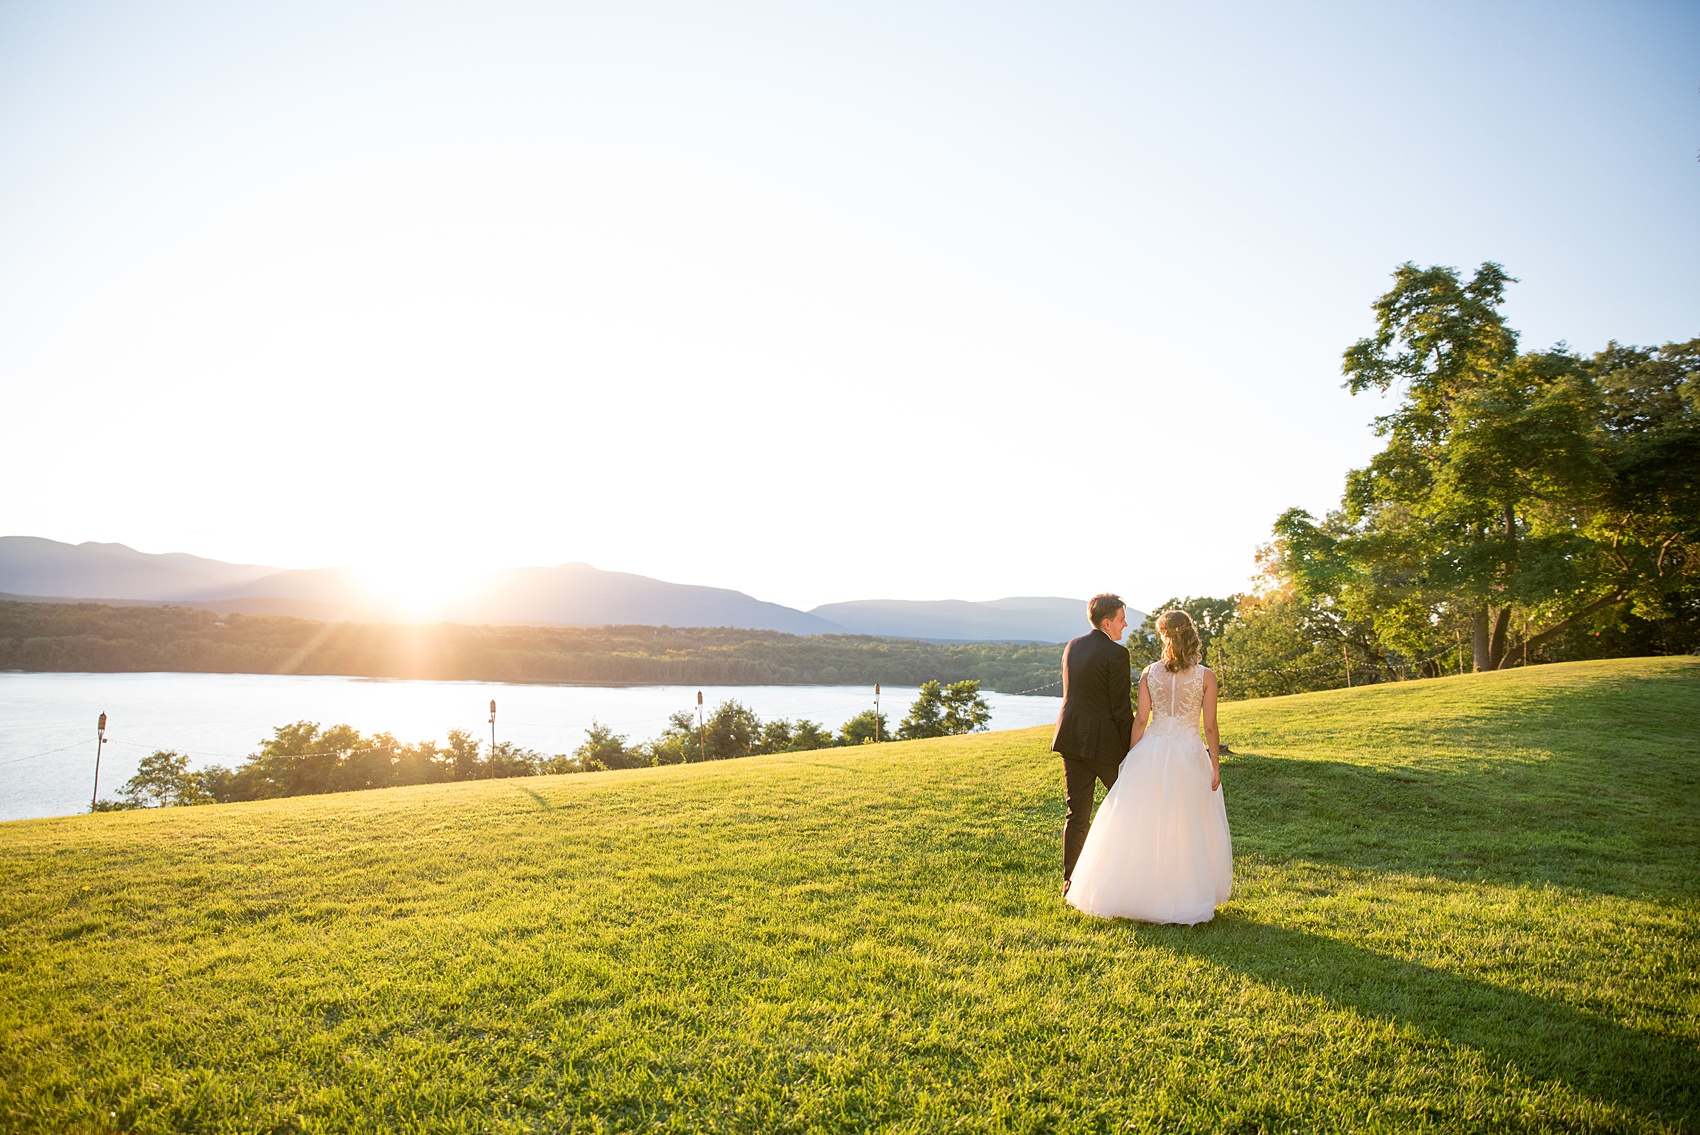 Mikkel Paige Photography photos from a Southwood Estate Wedding in Germantown, New York in the Hudson Valley. Golden hour photo of the bride and groom walking towards the picturesque mountains.